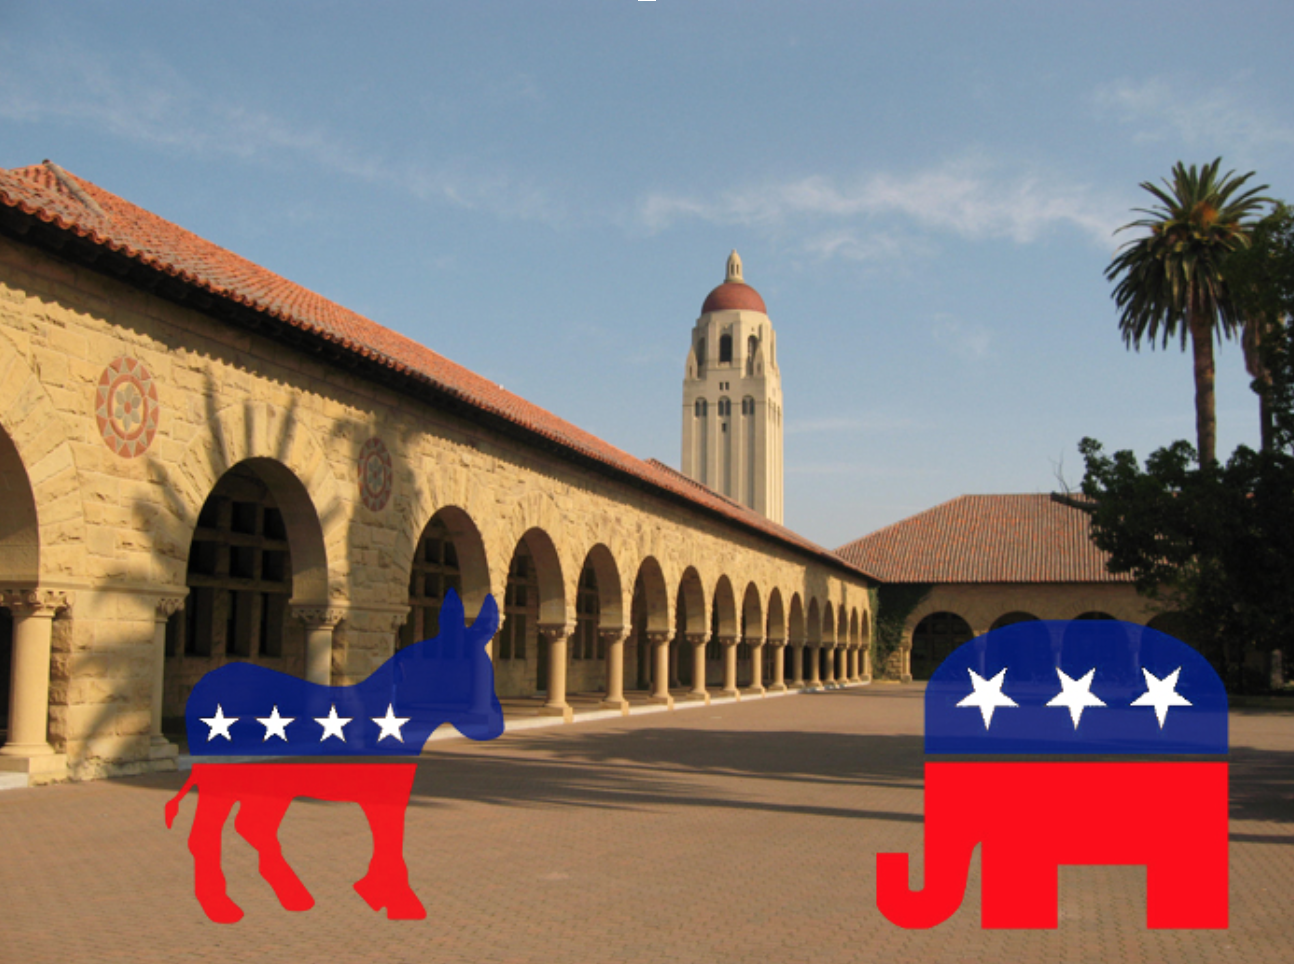 Where Does Stanford Actually Stand?